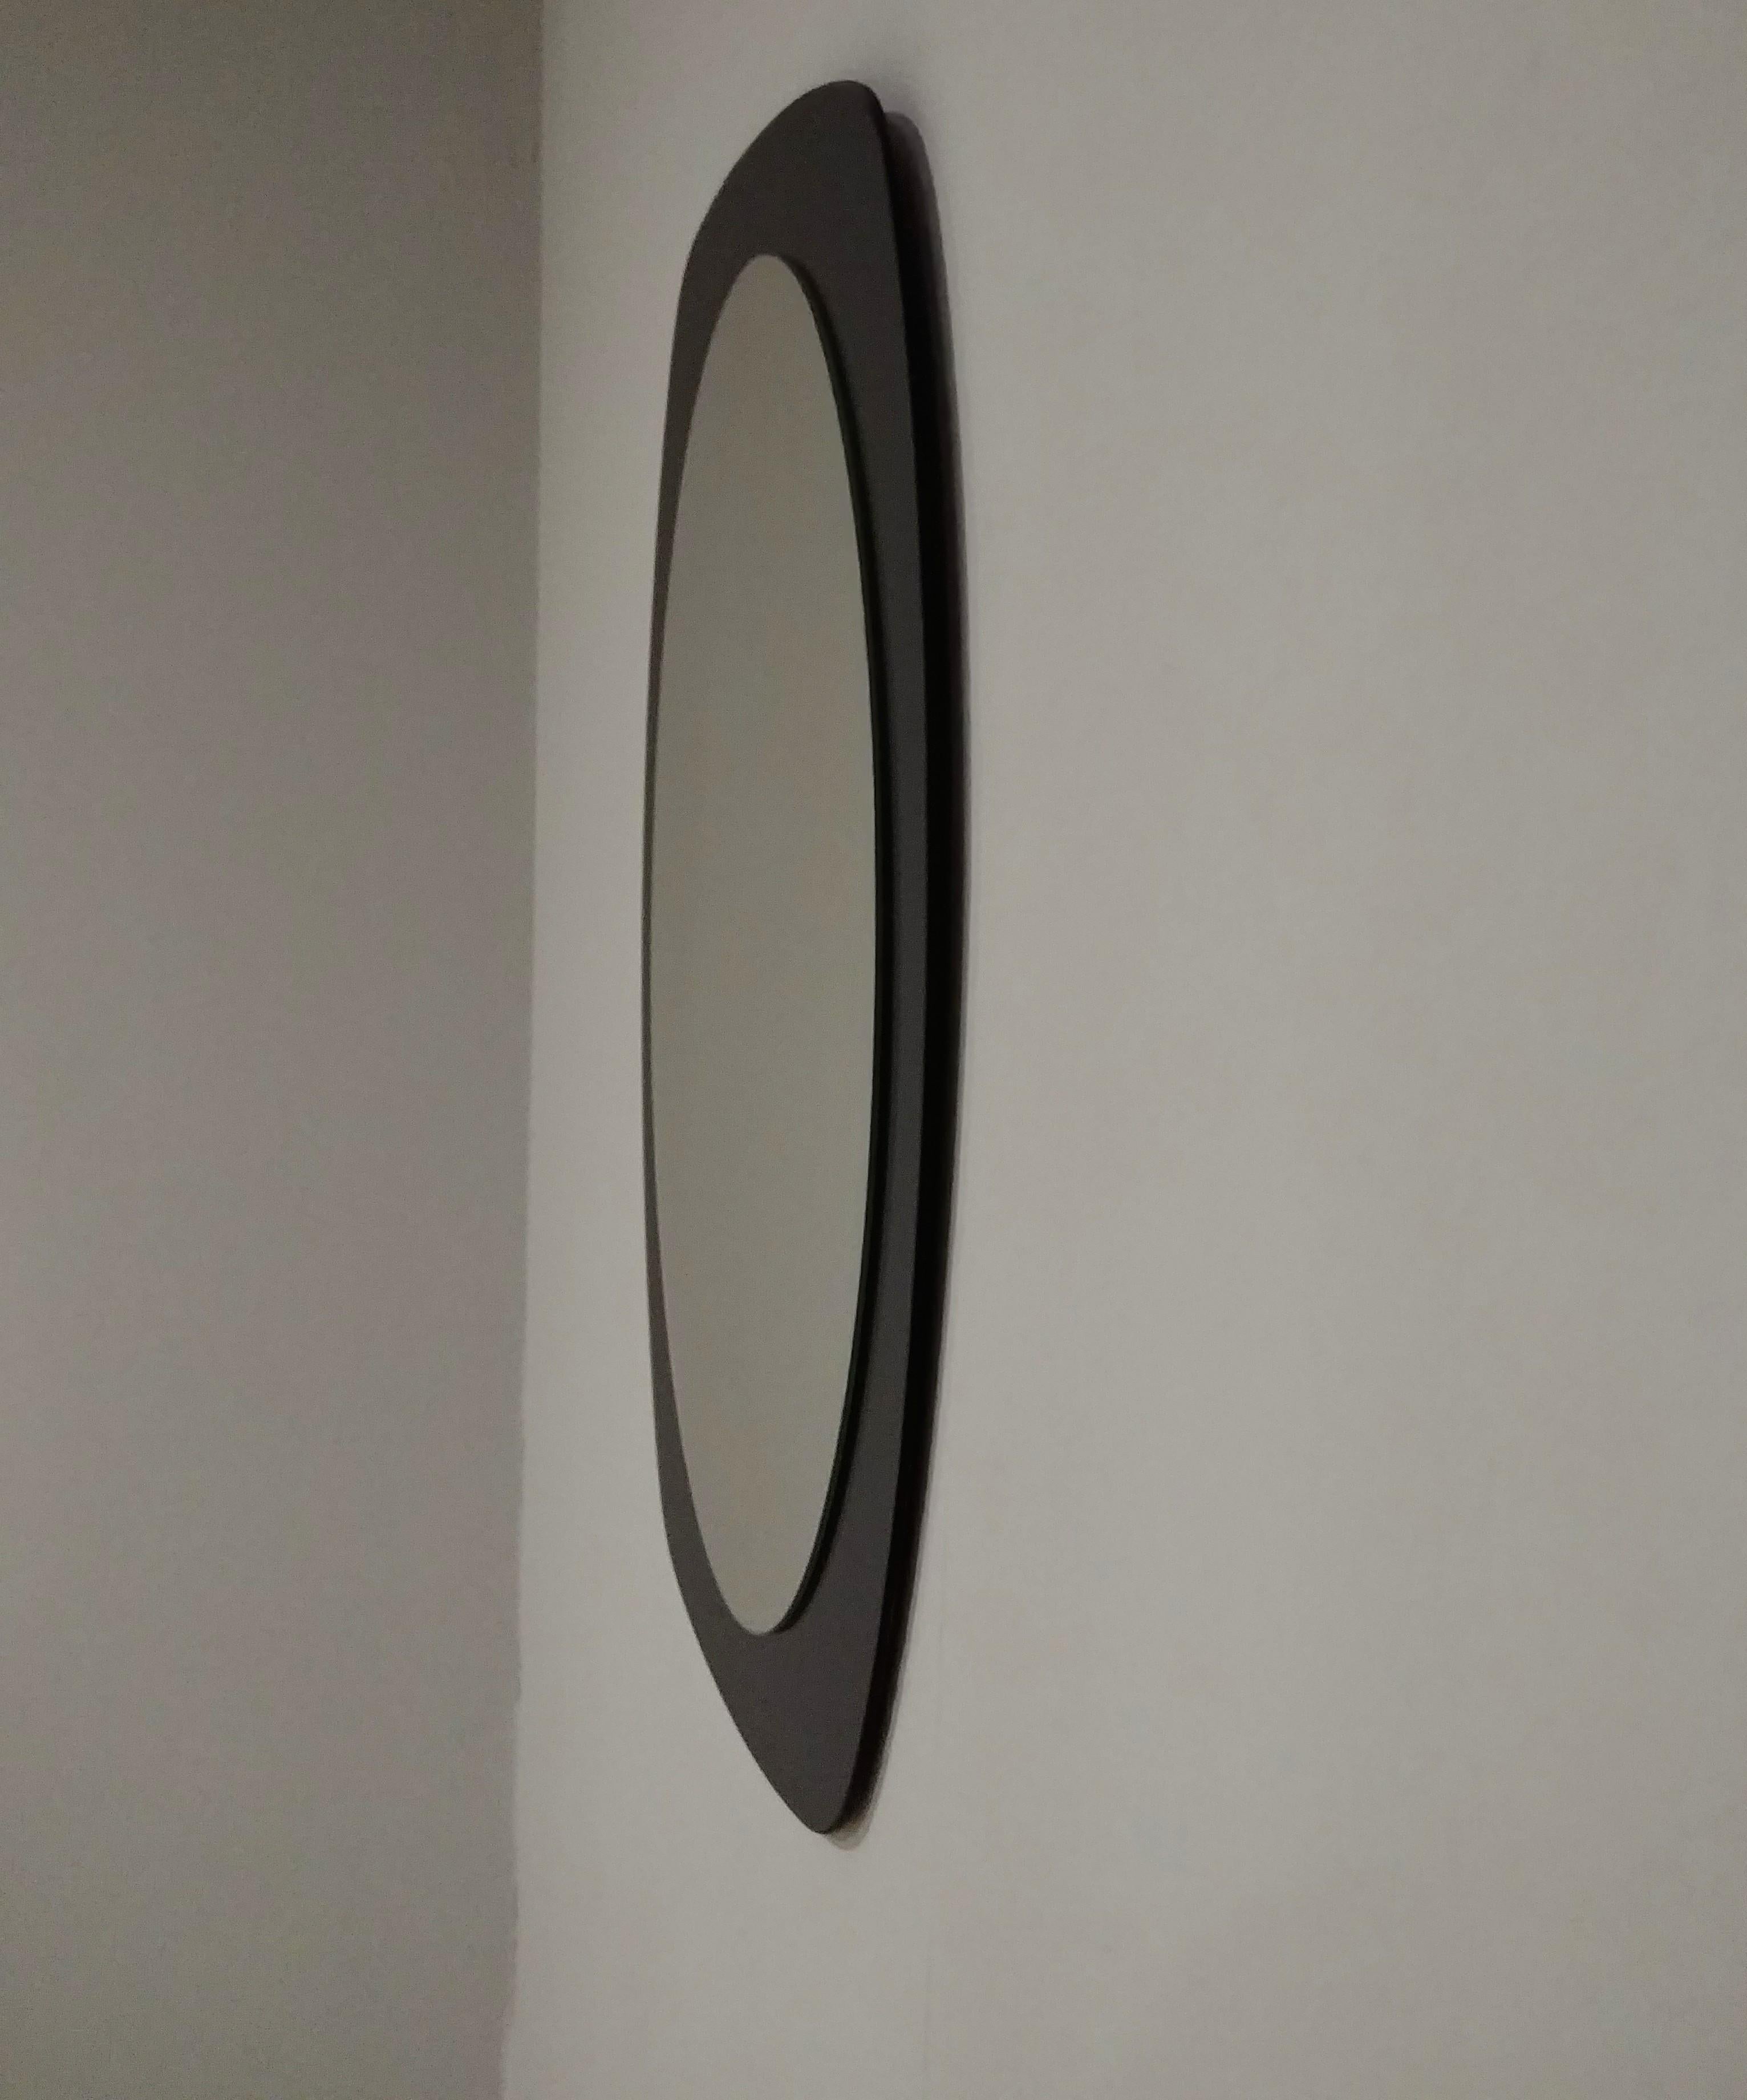 Oval-shaped mirror with square-shaped frame entirely in smoked glass. Italian production of the 1970s.